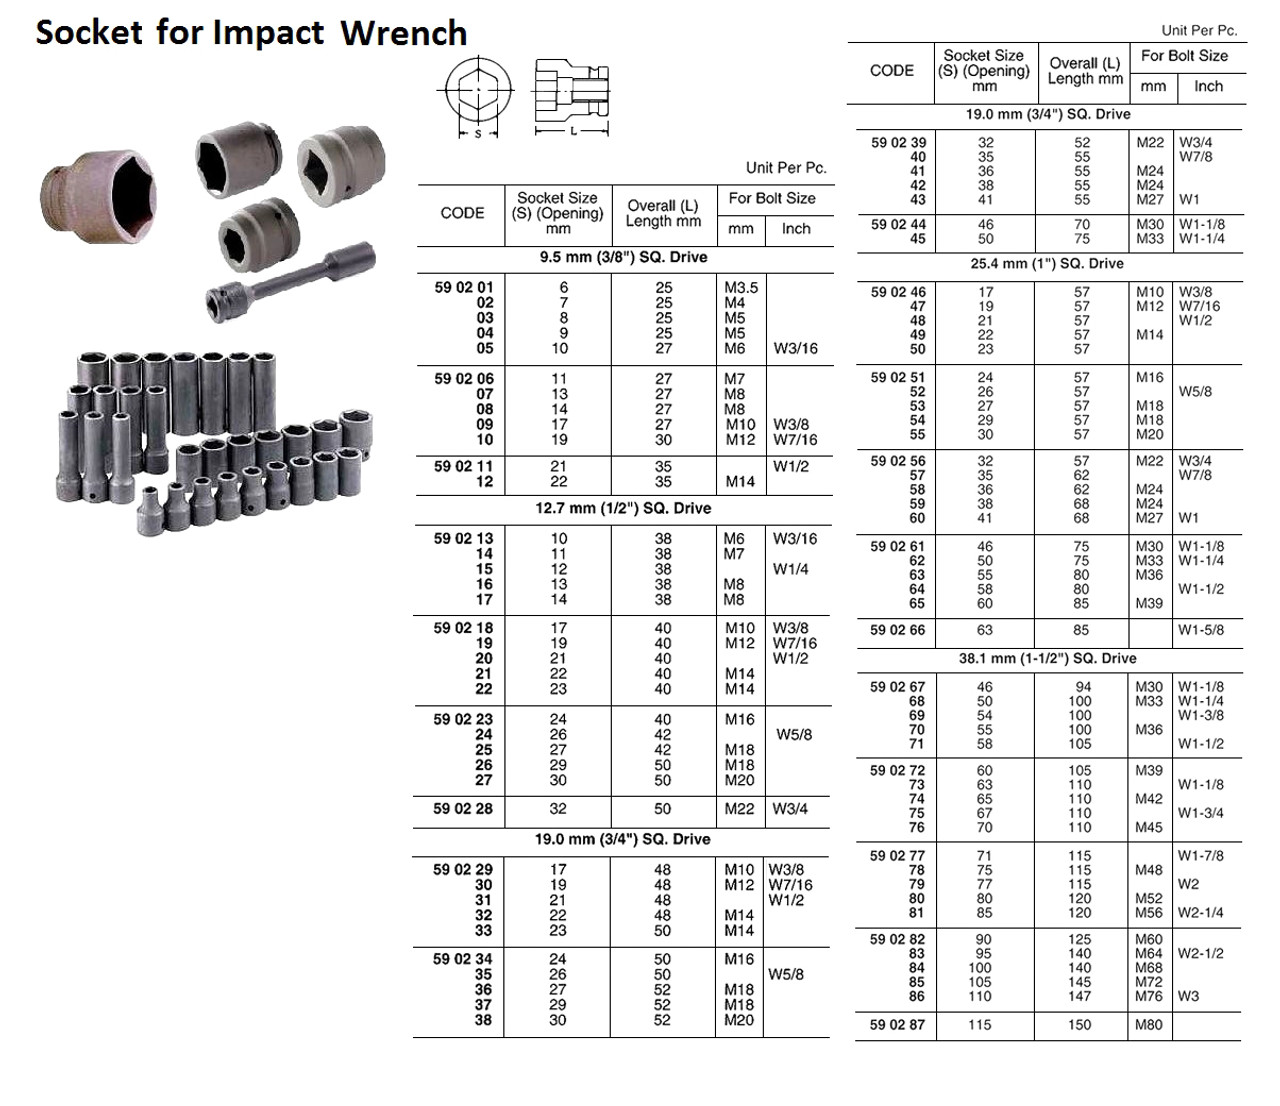 IMPA 590237 WRENCH IMPACT SOCKET 29mm Square Drive 3/4"